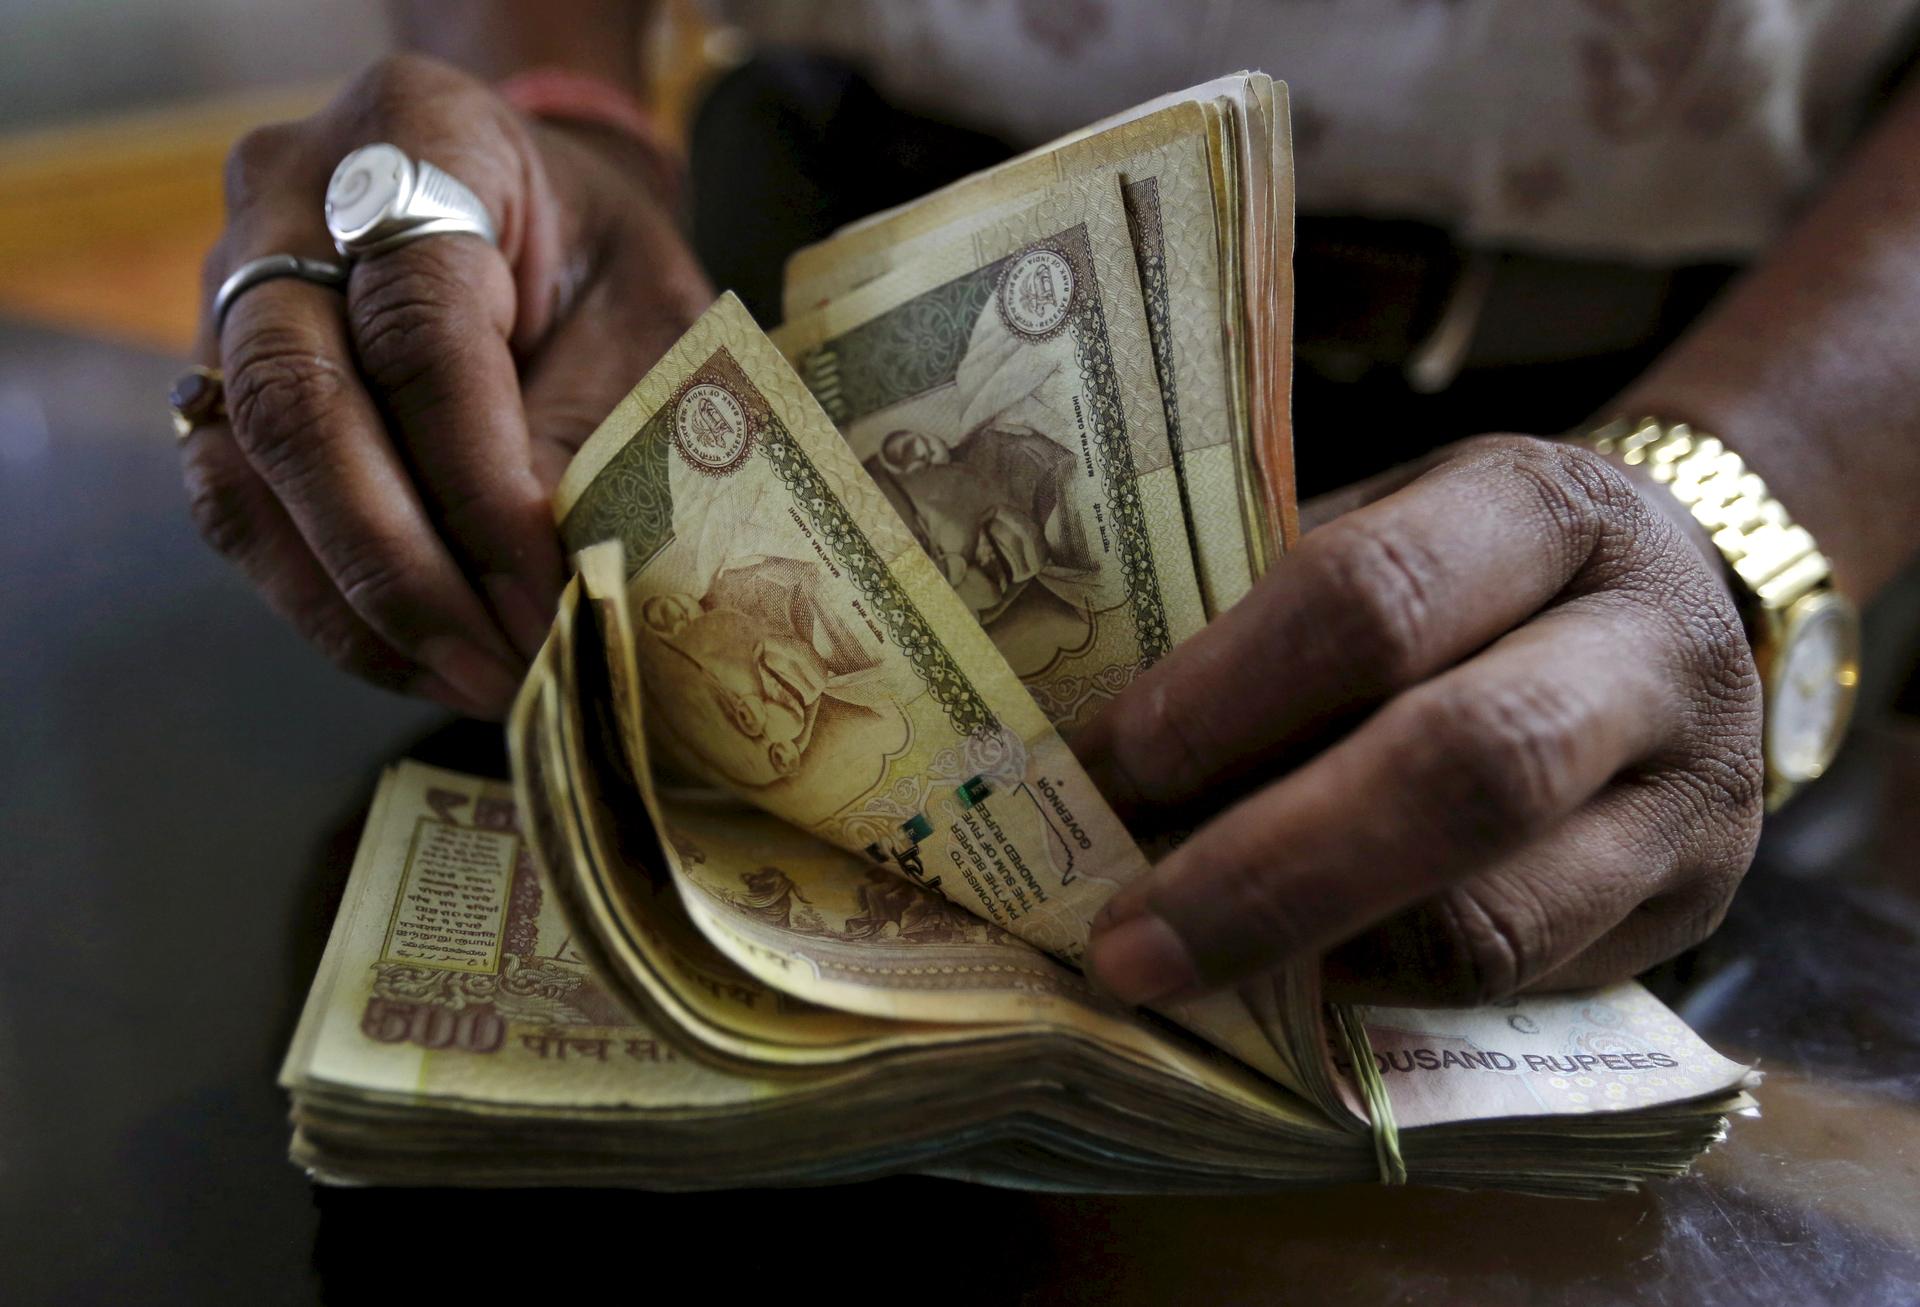 The thieves made off with around $750,000 of cash in Indian banknotes (library picture).